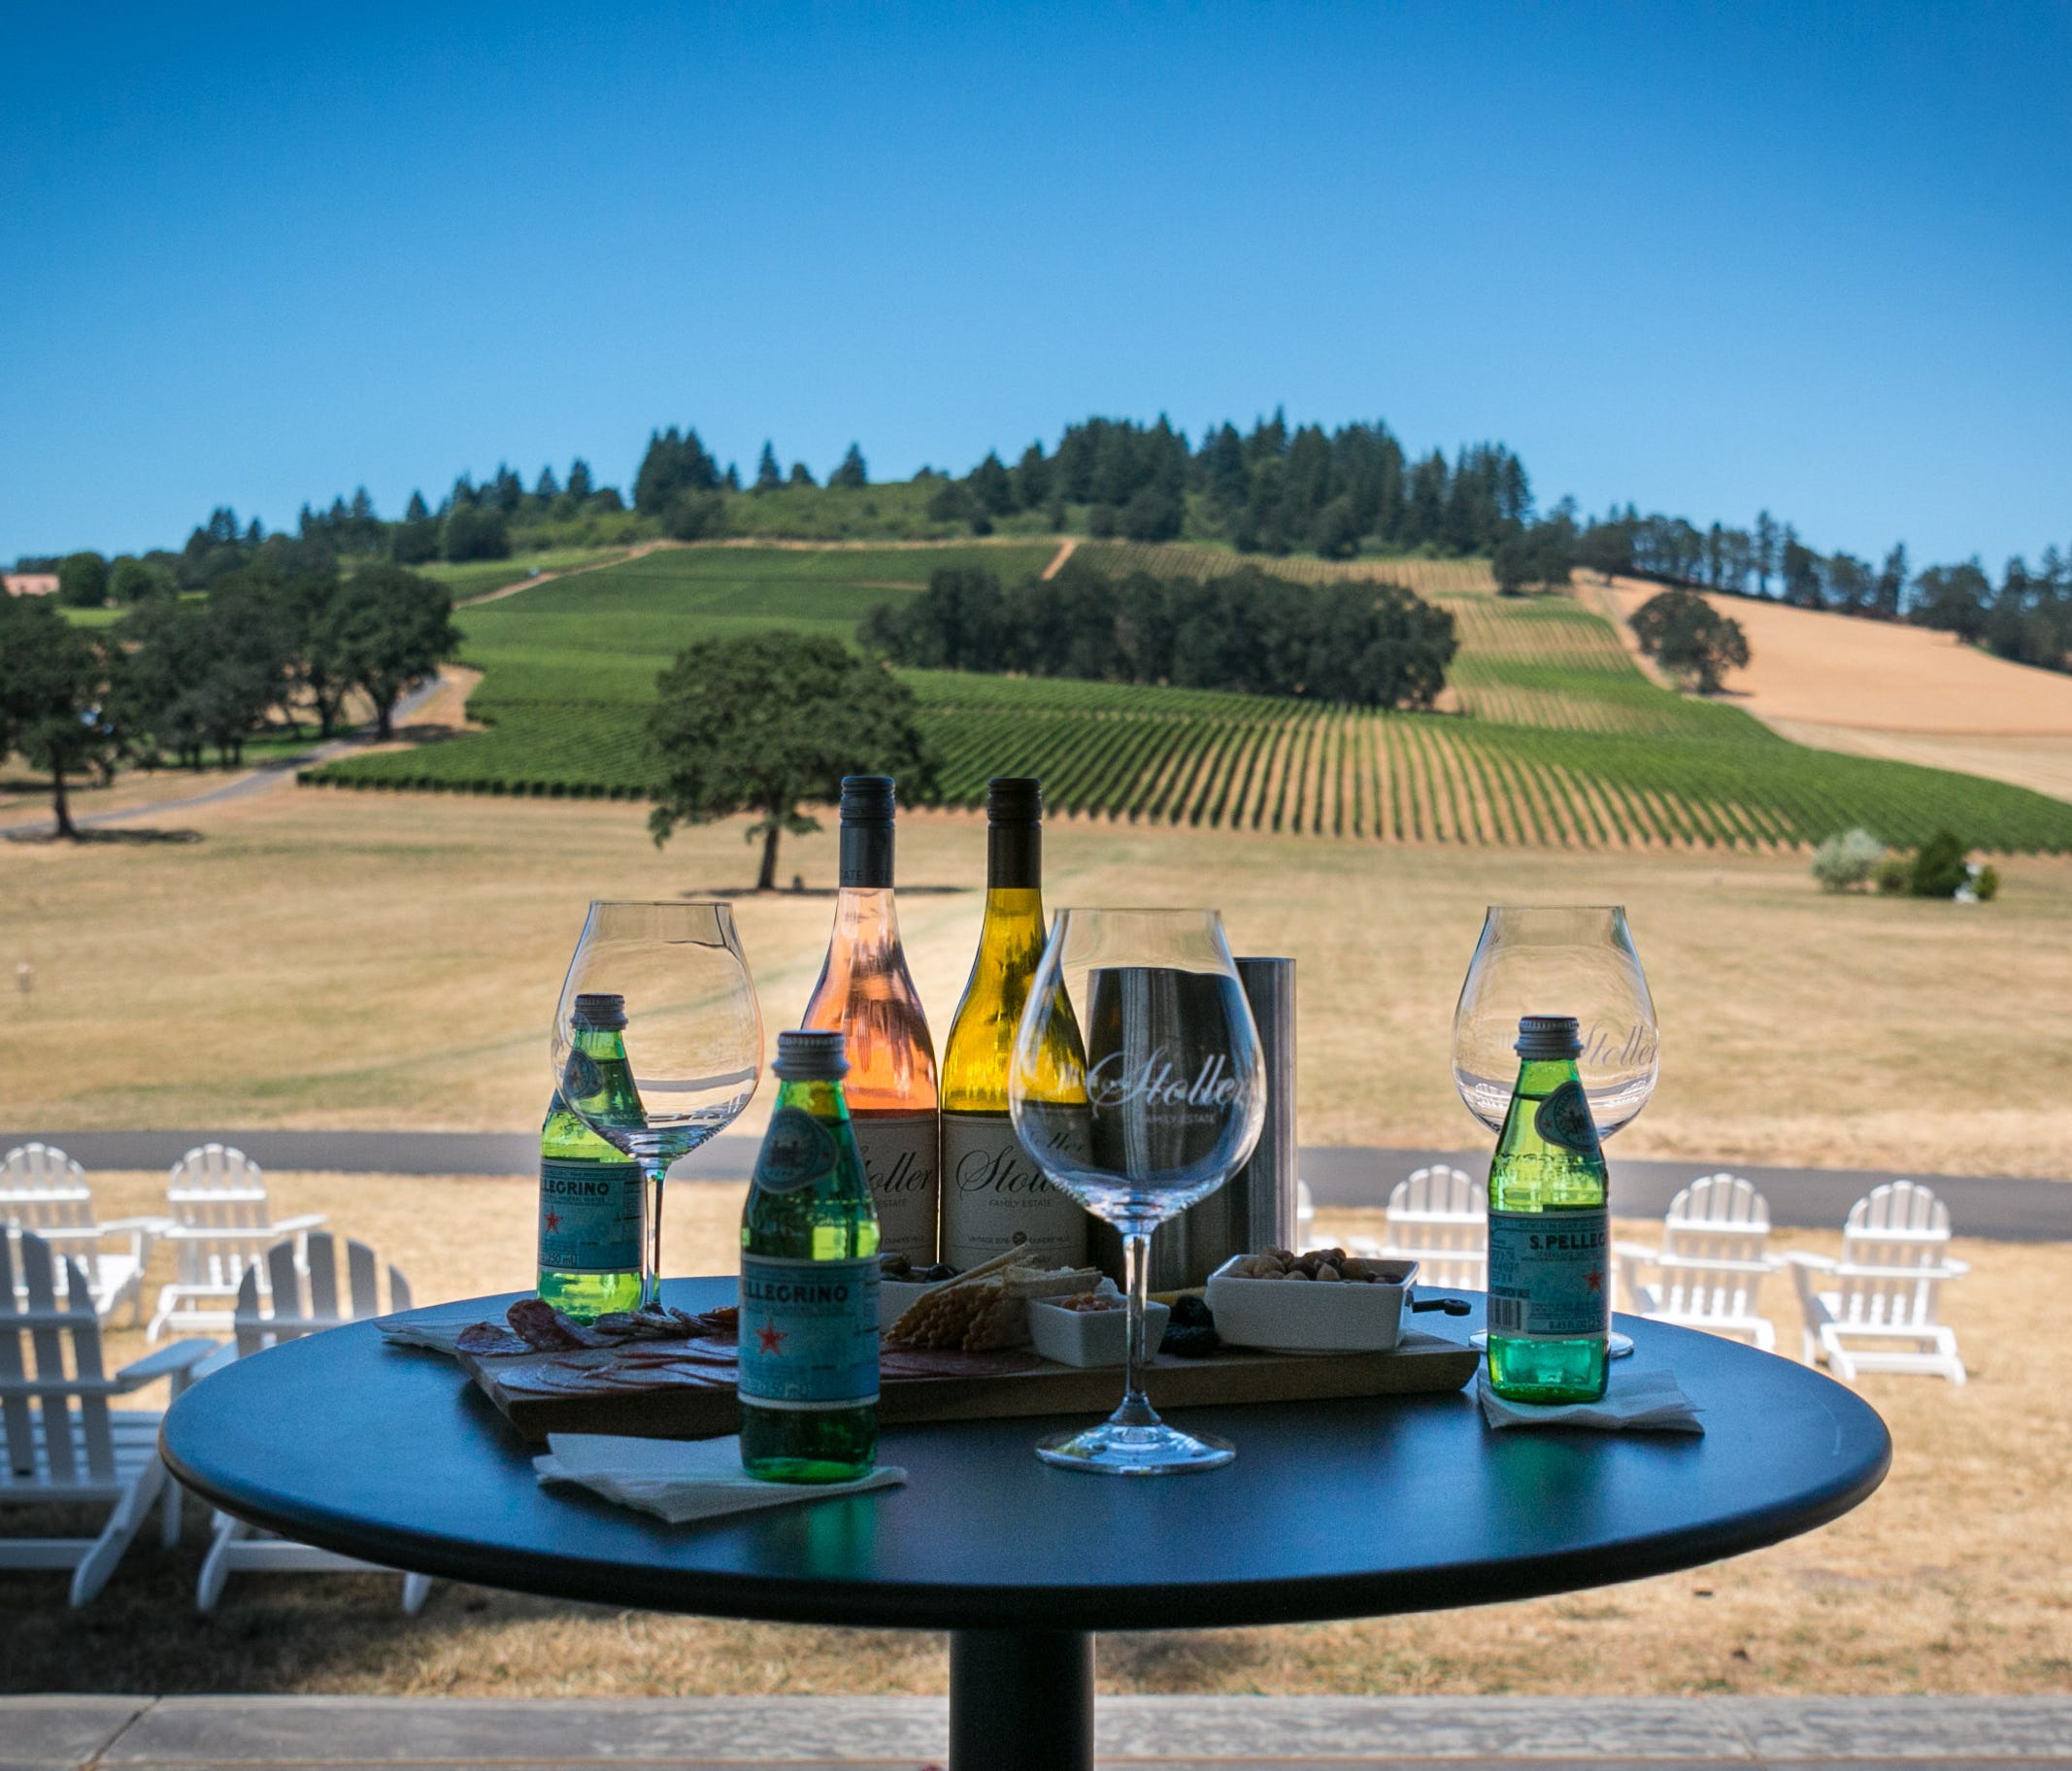 Bill Stoller produces a range of wines, relatively affordable given the region's notoriously expensive reputation, including a Dundee Hills Pinot and Chardonnay. A glass of the rosé on a beautiful summer afternoon can't be beat.